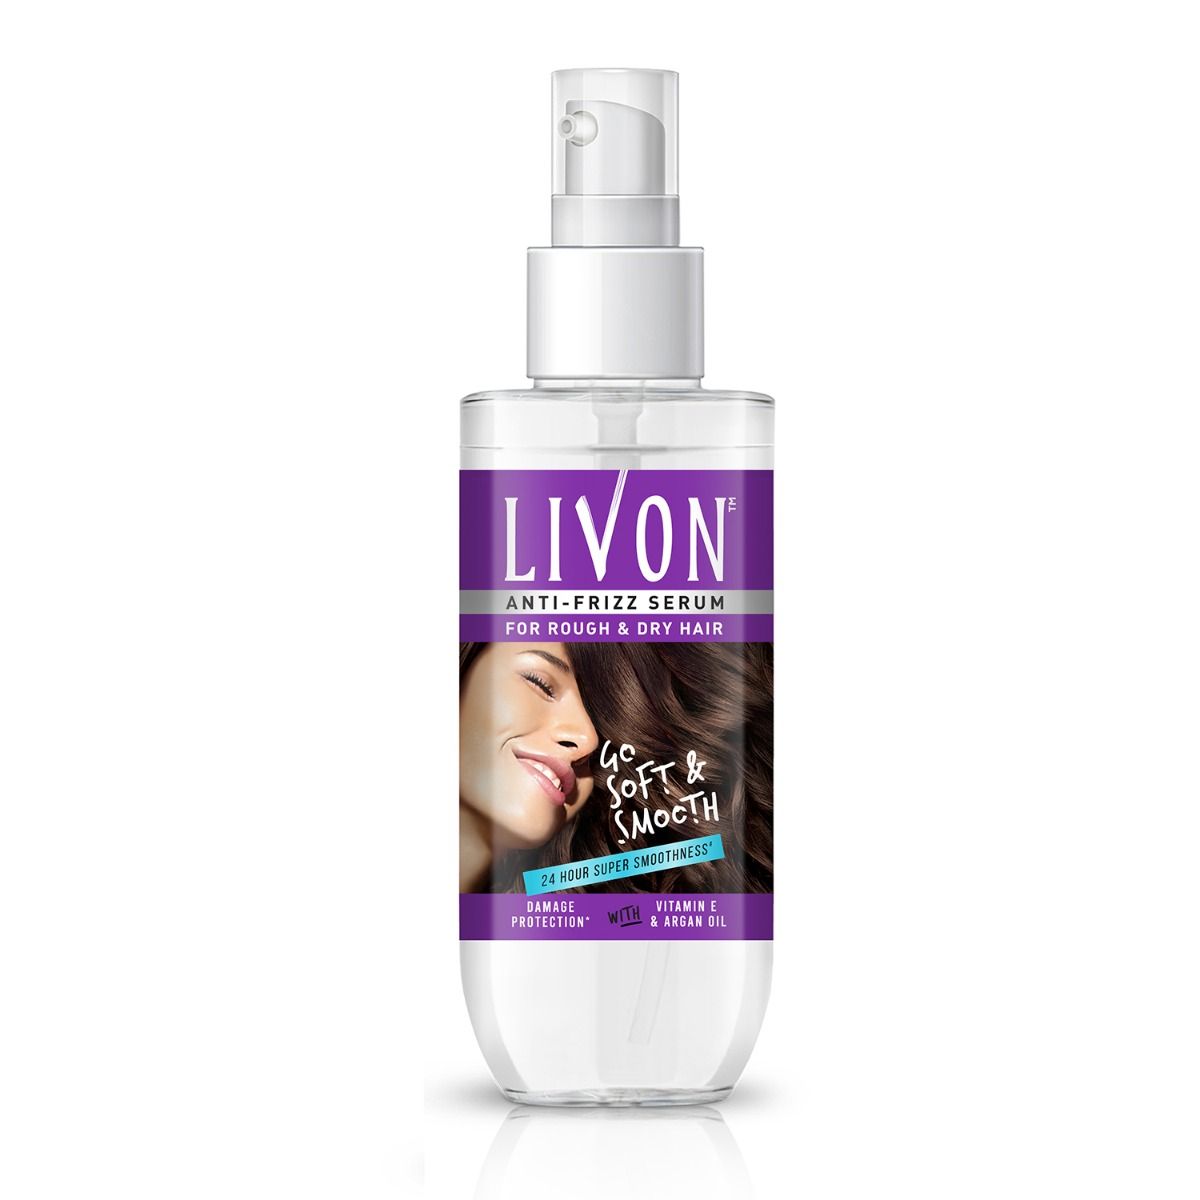 Livon Anti-Frizz Serum For Rough & Dry Hair, 50 ml Price, Uses, Side  Effects, Composition - Apollo Pharmacy